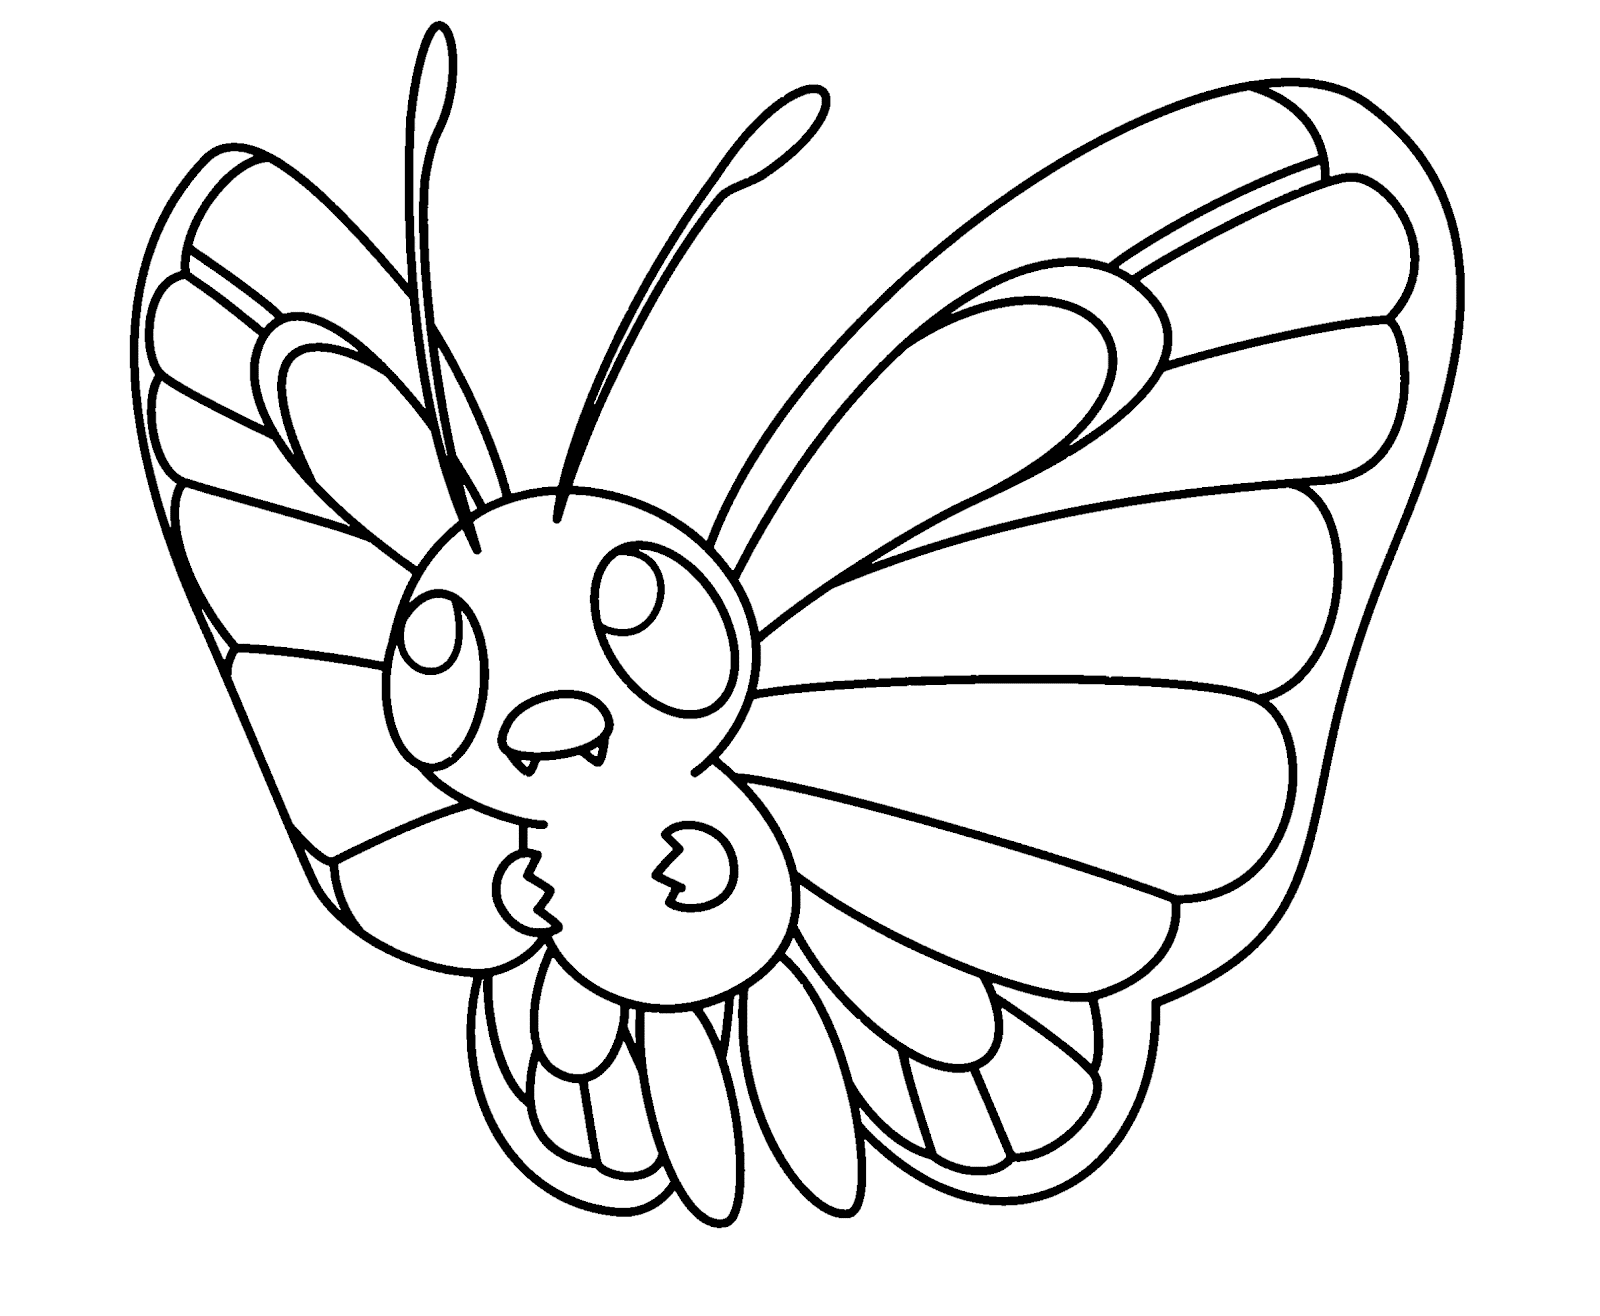 Butterfree Coloring Pages Gallery - Free Pokemon Coloring Pages